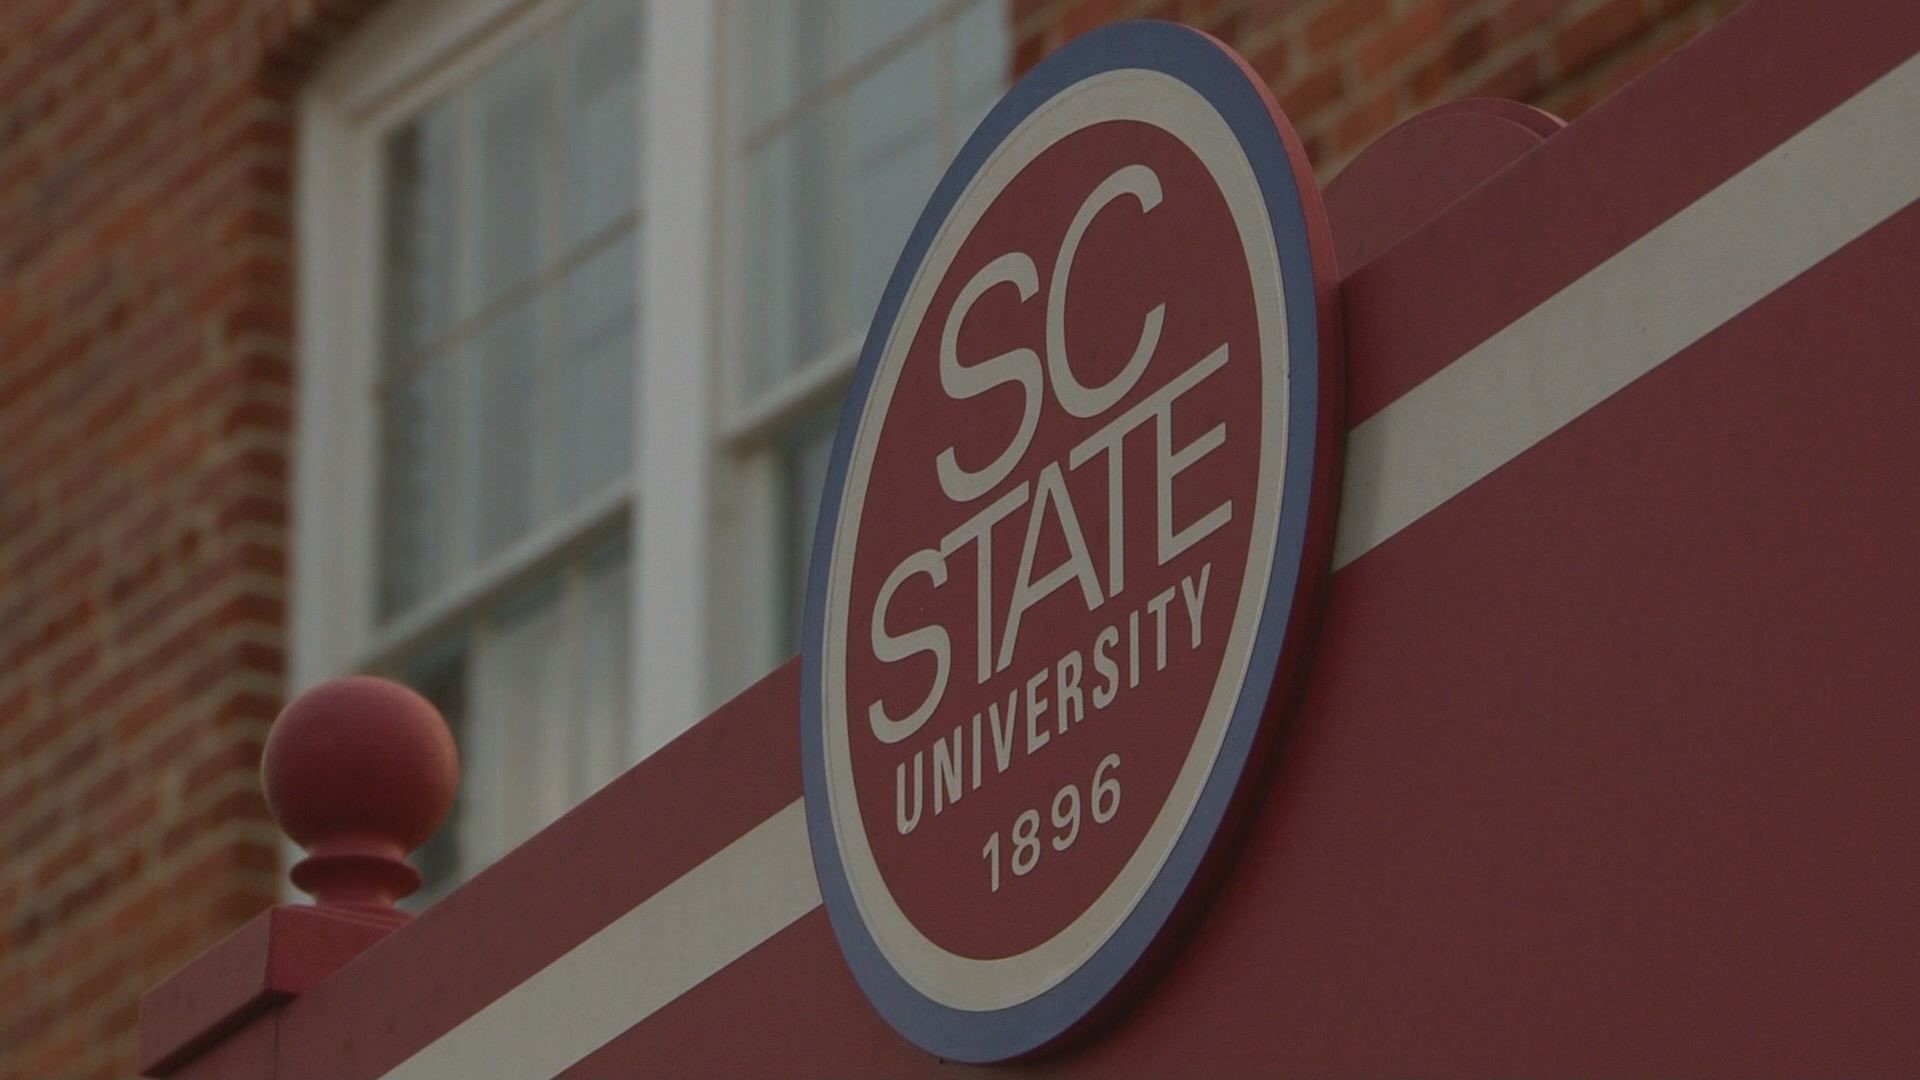 A student is recovering from a gunshot wound after a shooting at South Carolina State University, which temporarily placed the campus on lockdown Friday morning.